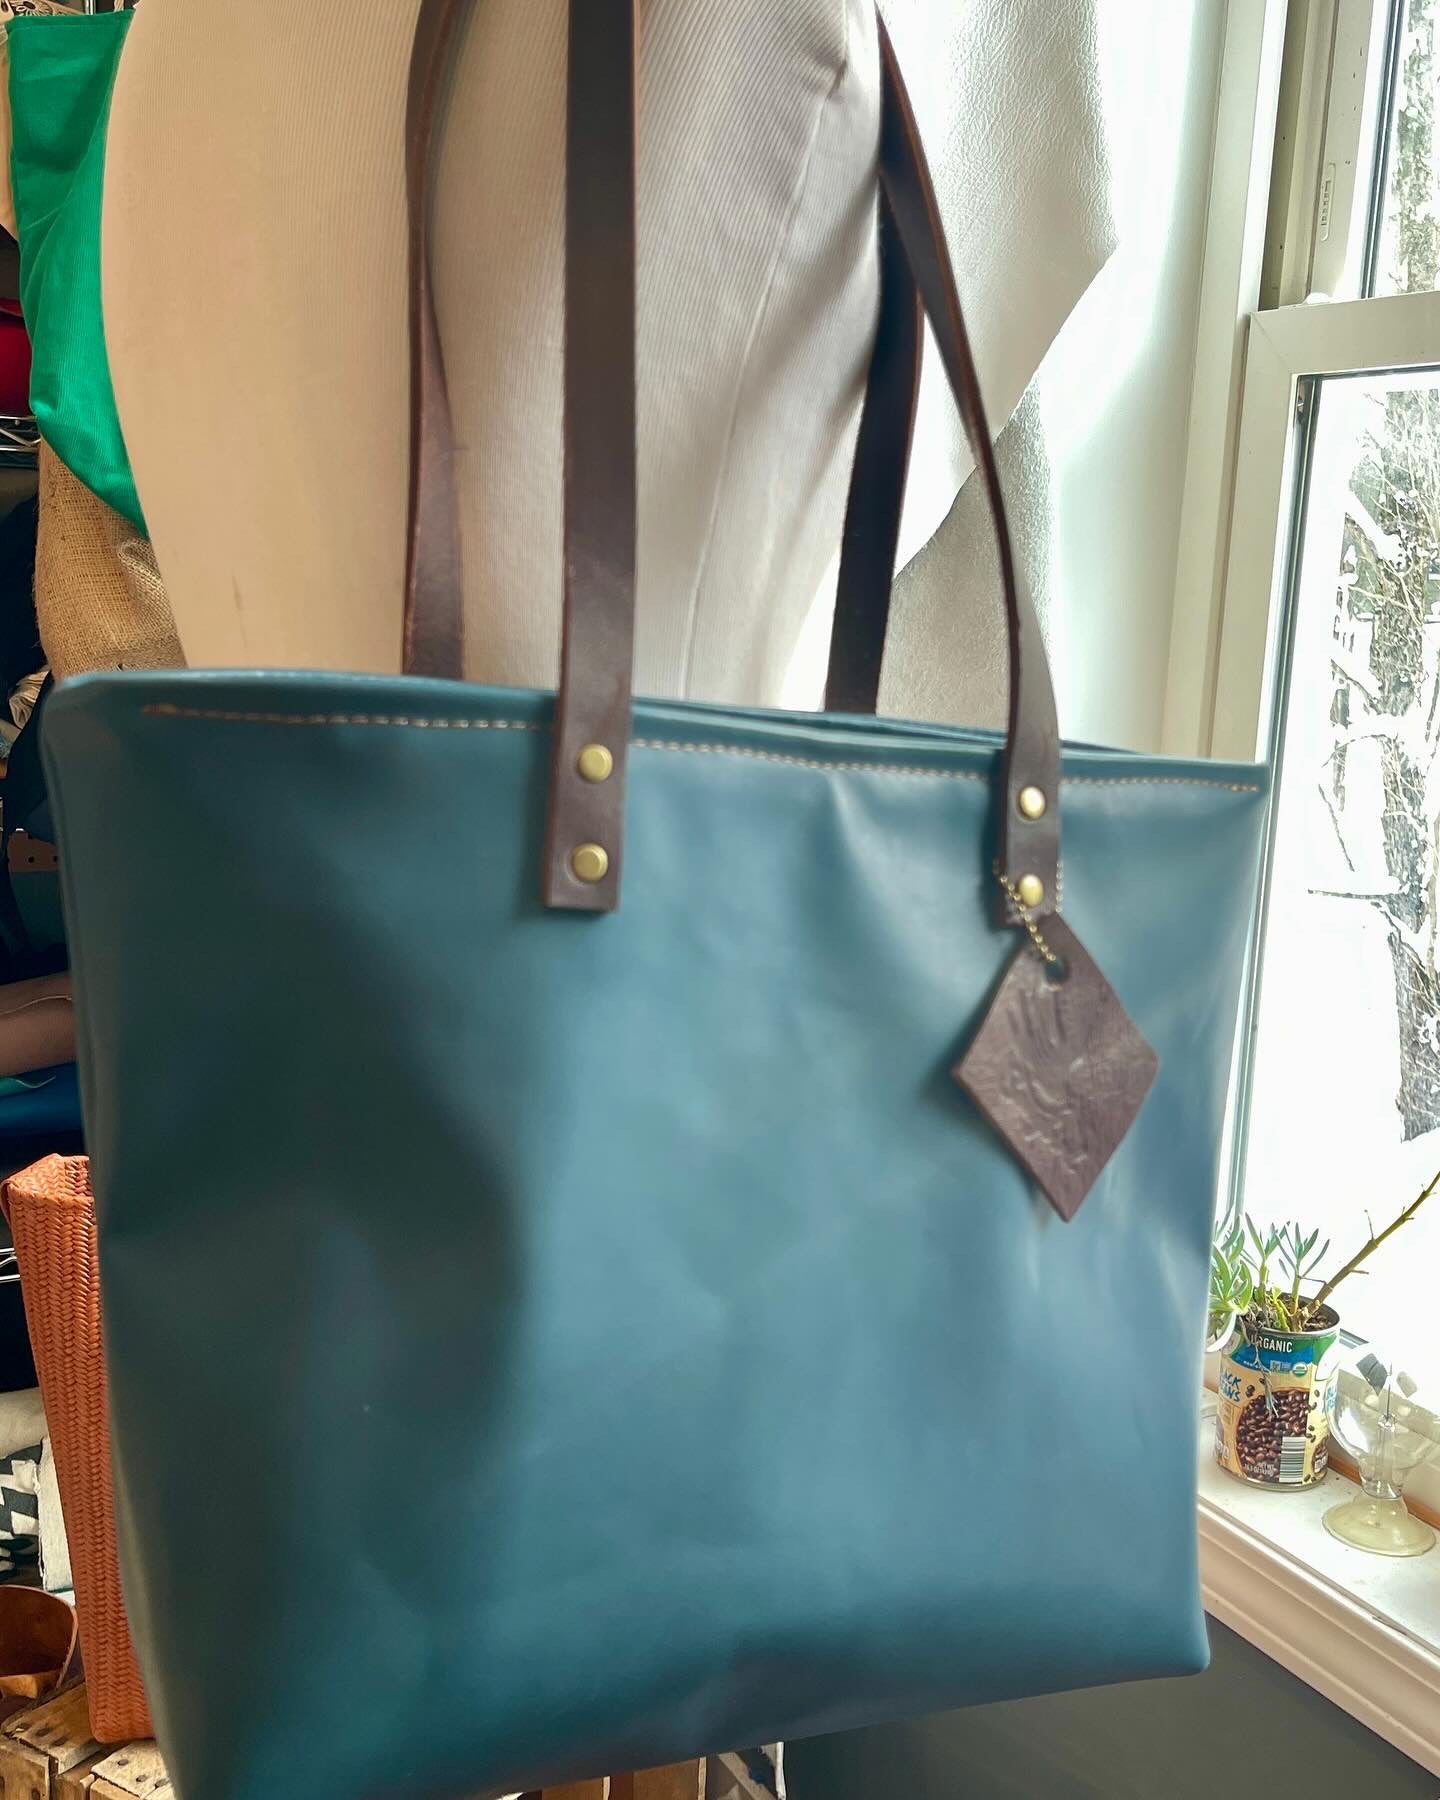 Blue Tote 4.75 inch base